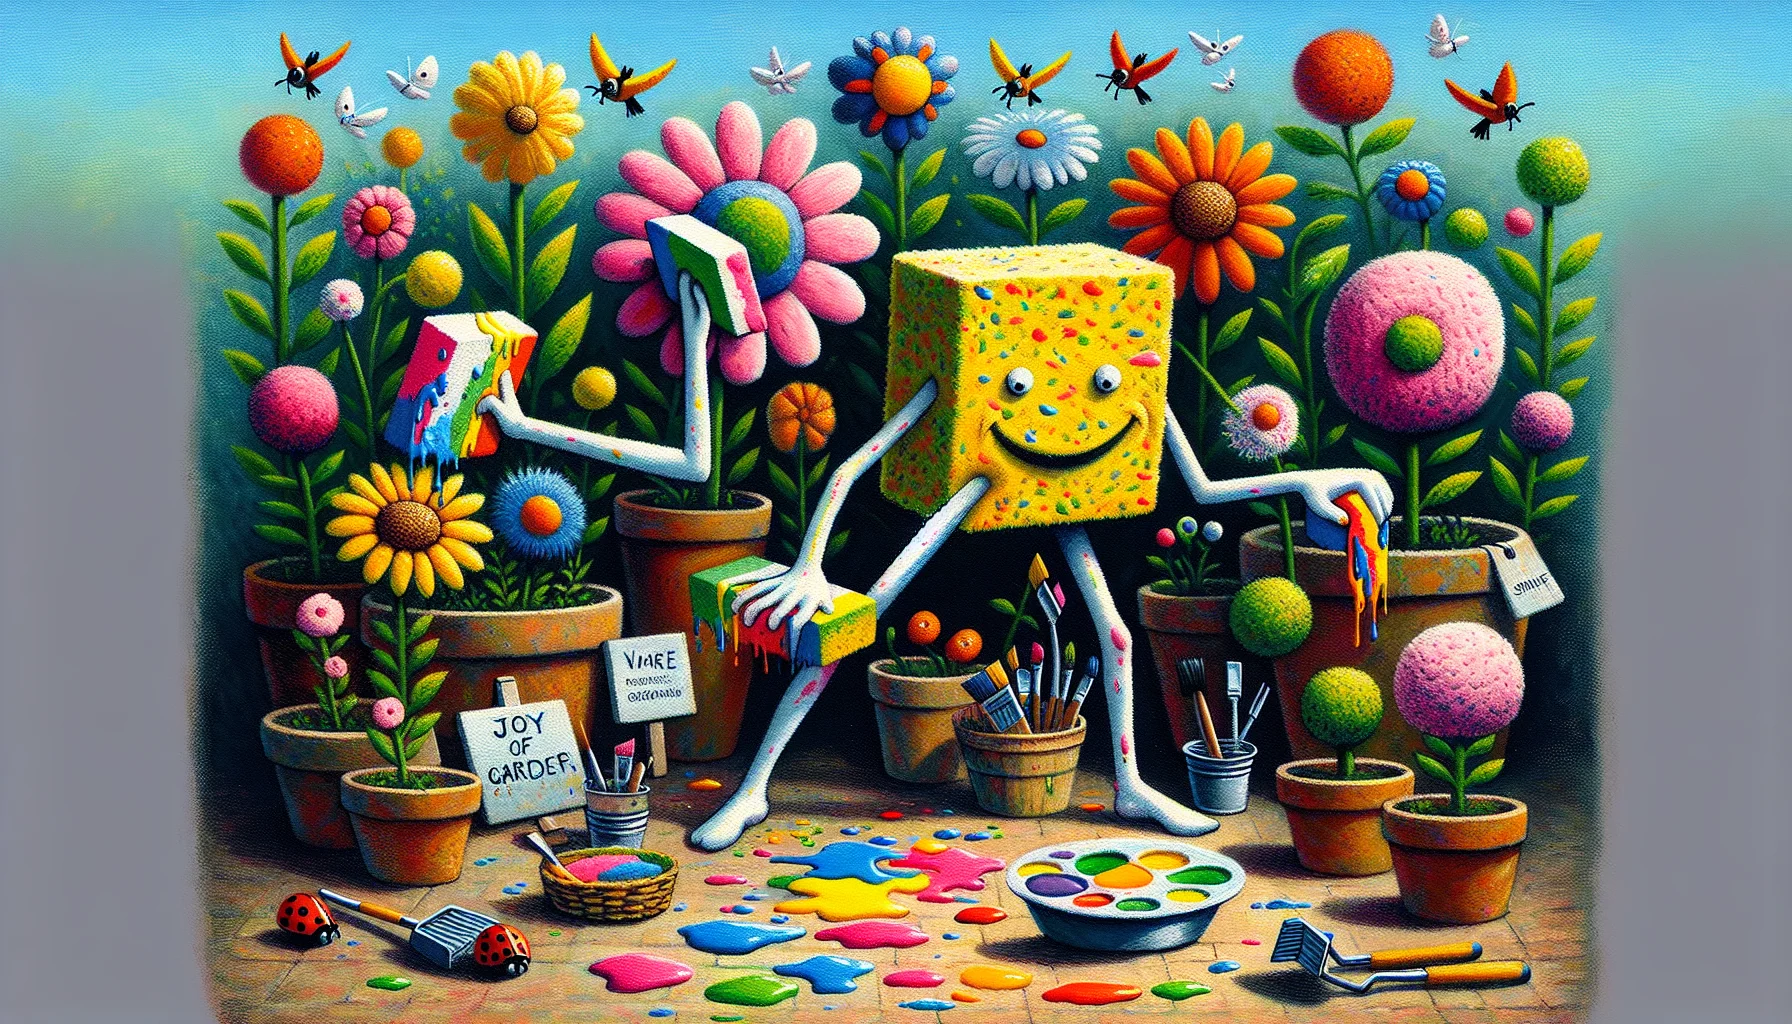 Create a humorous and engaging illustration of a garden scene featuring a fictional character with square-shaped clothes, utilising sponge painting techniques. The character is playfully smearing vibrant paint on an array of flowers and plants, with some garden critters like birds and ladybugs joining in the fun. The paint has unlikely effects on the plants, causing flowers to bloom in absurdly vivid colours and whimsical shapes. The garden tools around hint at the process, while a painted sign in the corner reads, 'Joy of Gardening.' This post-impressionistic style image should encourage people to participate in garden activities with a touch of creativity.